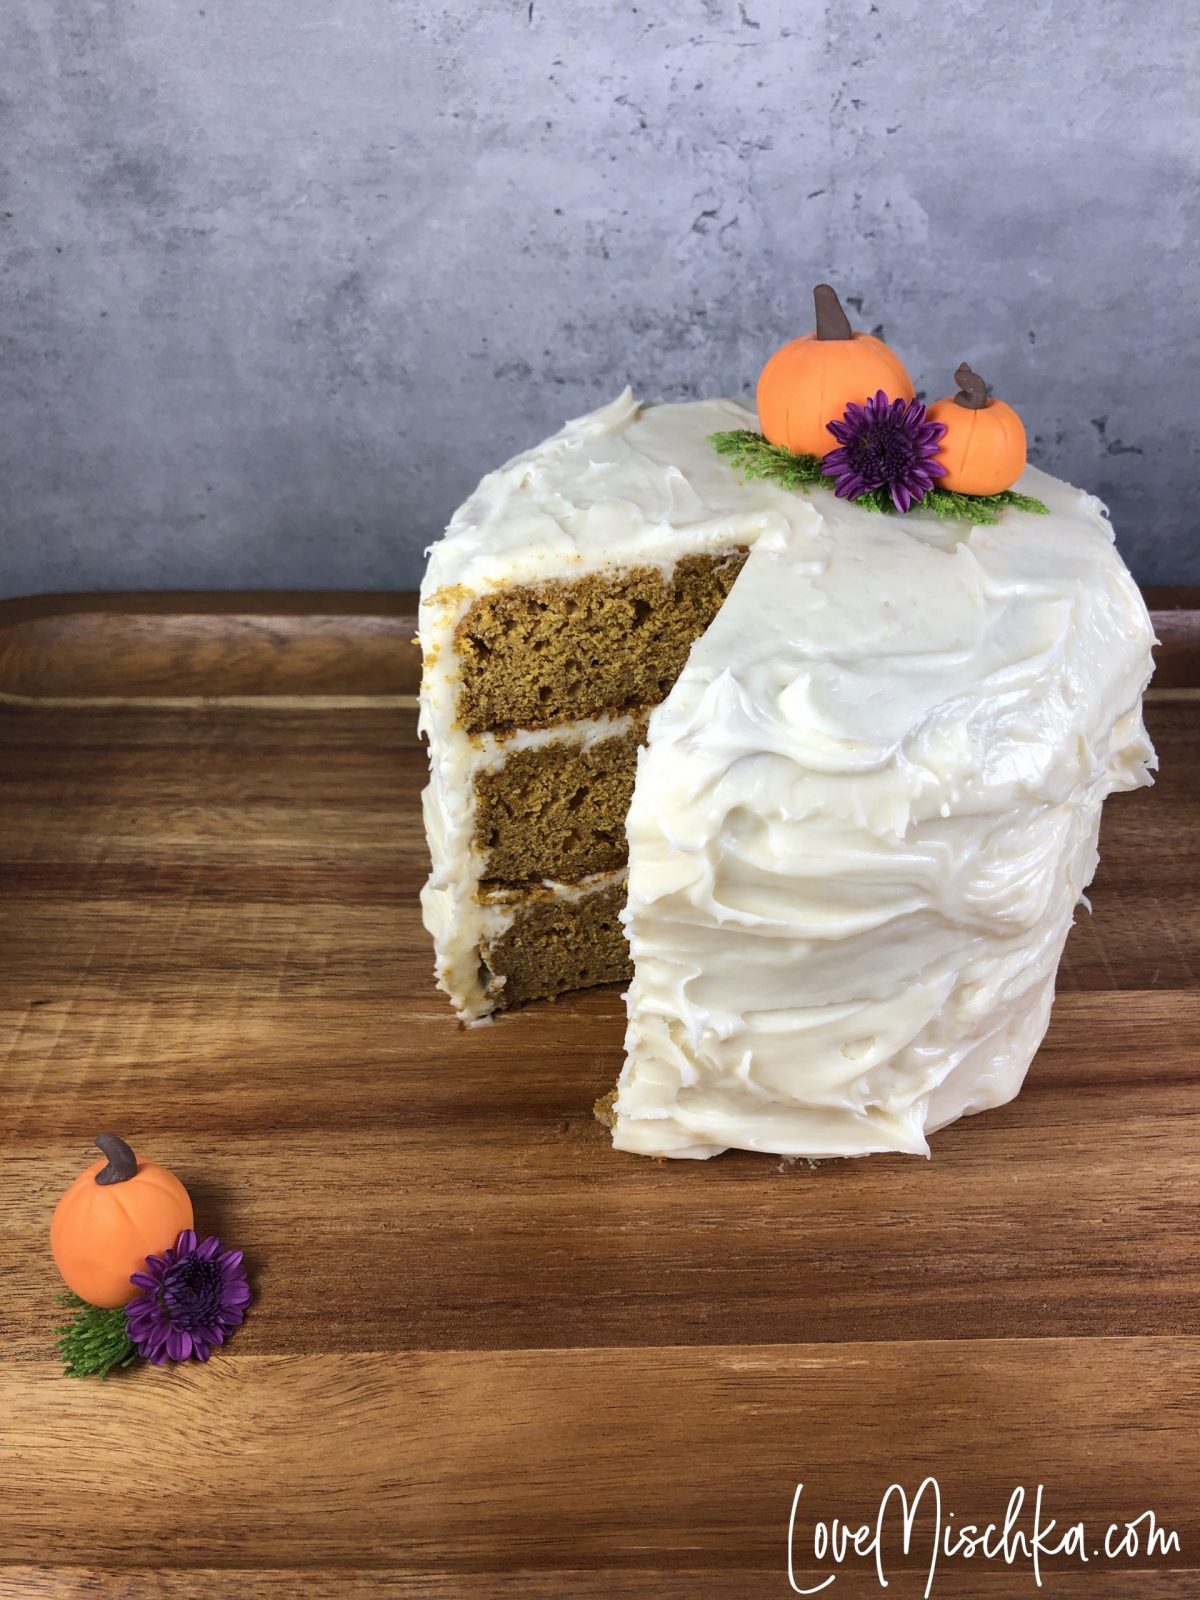 Tall Pumpkin Cake with a Slice Missing. Two Pumpkins on the cake and one on the wooden serving tray.